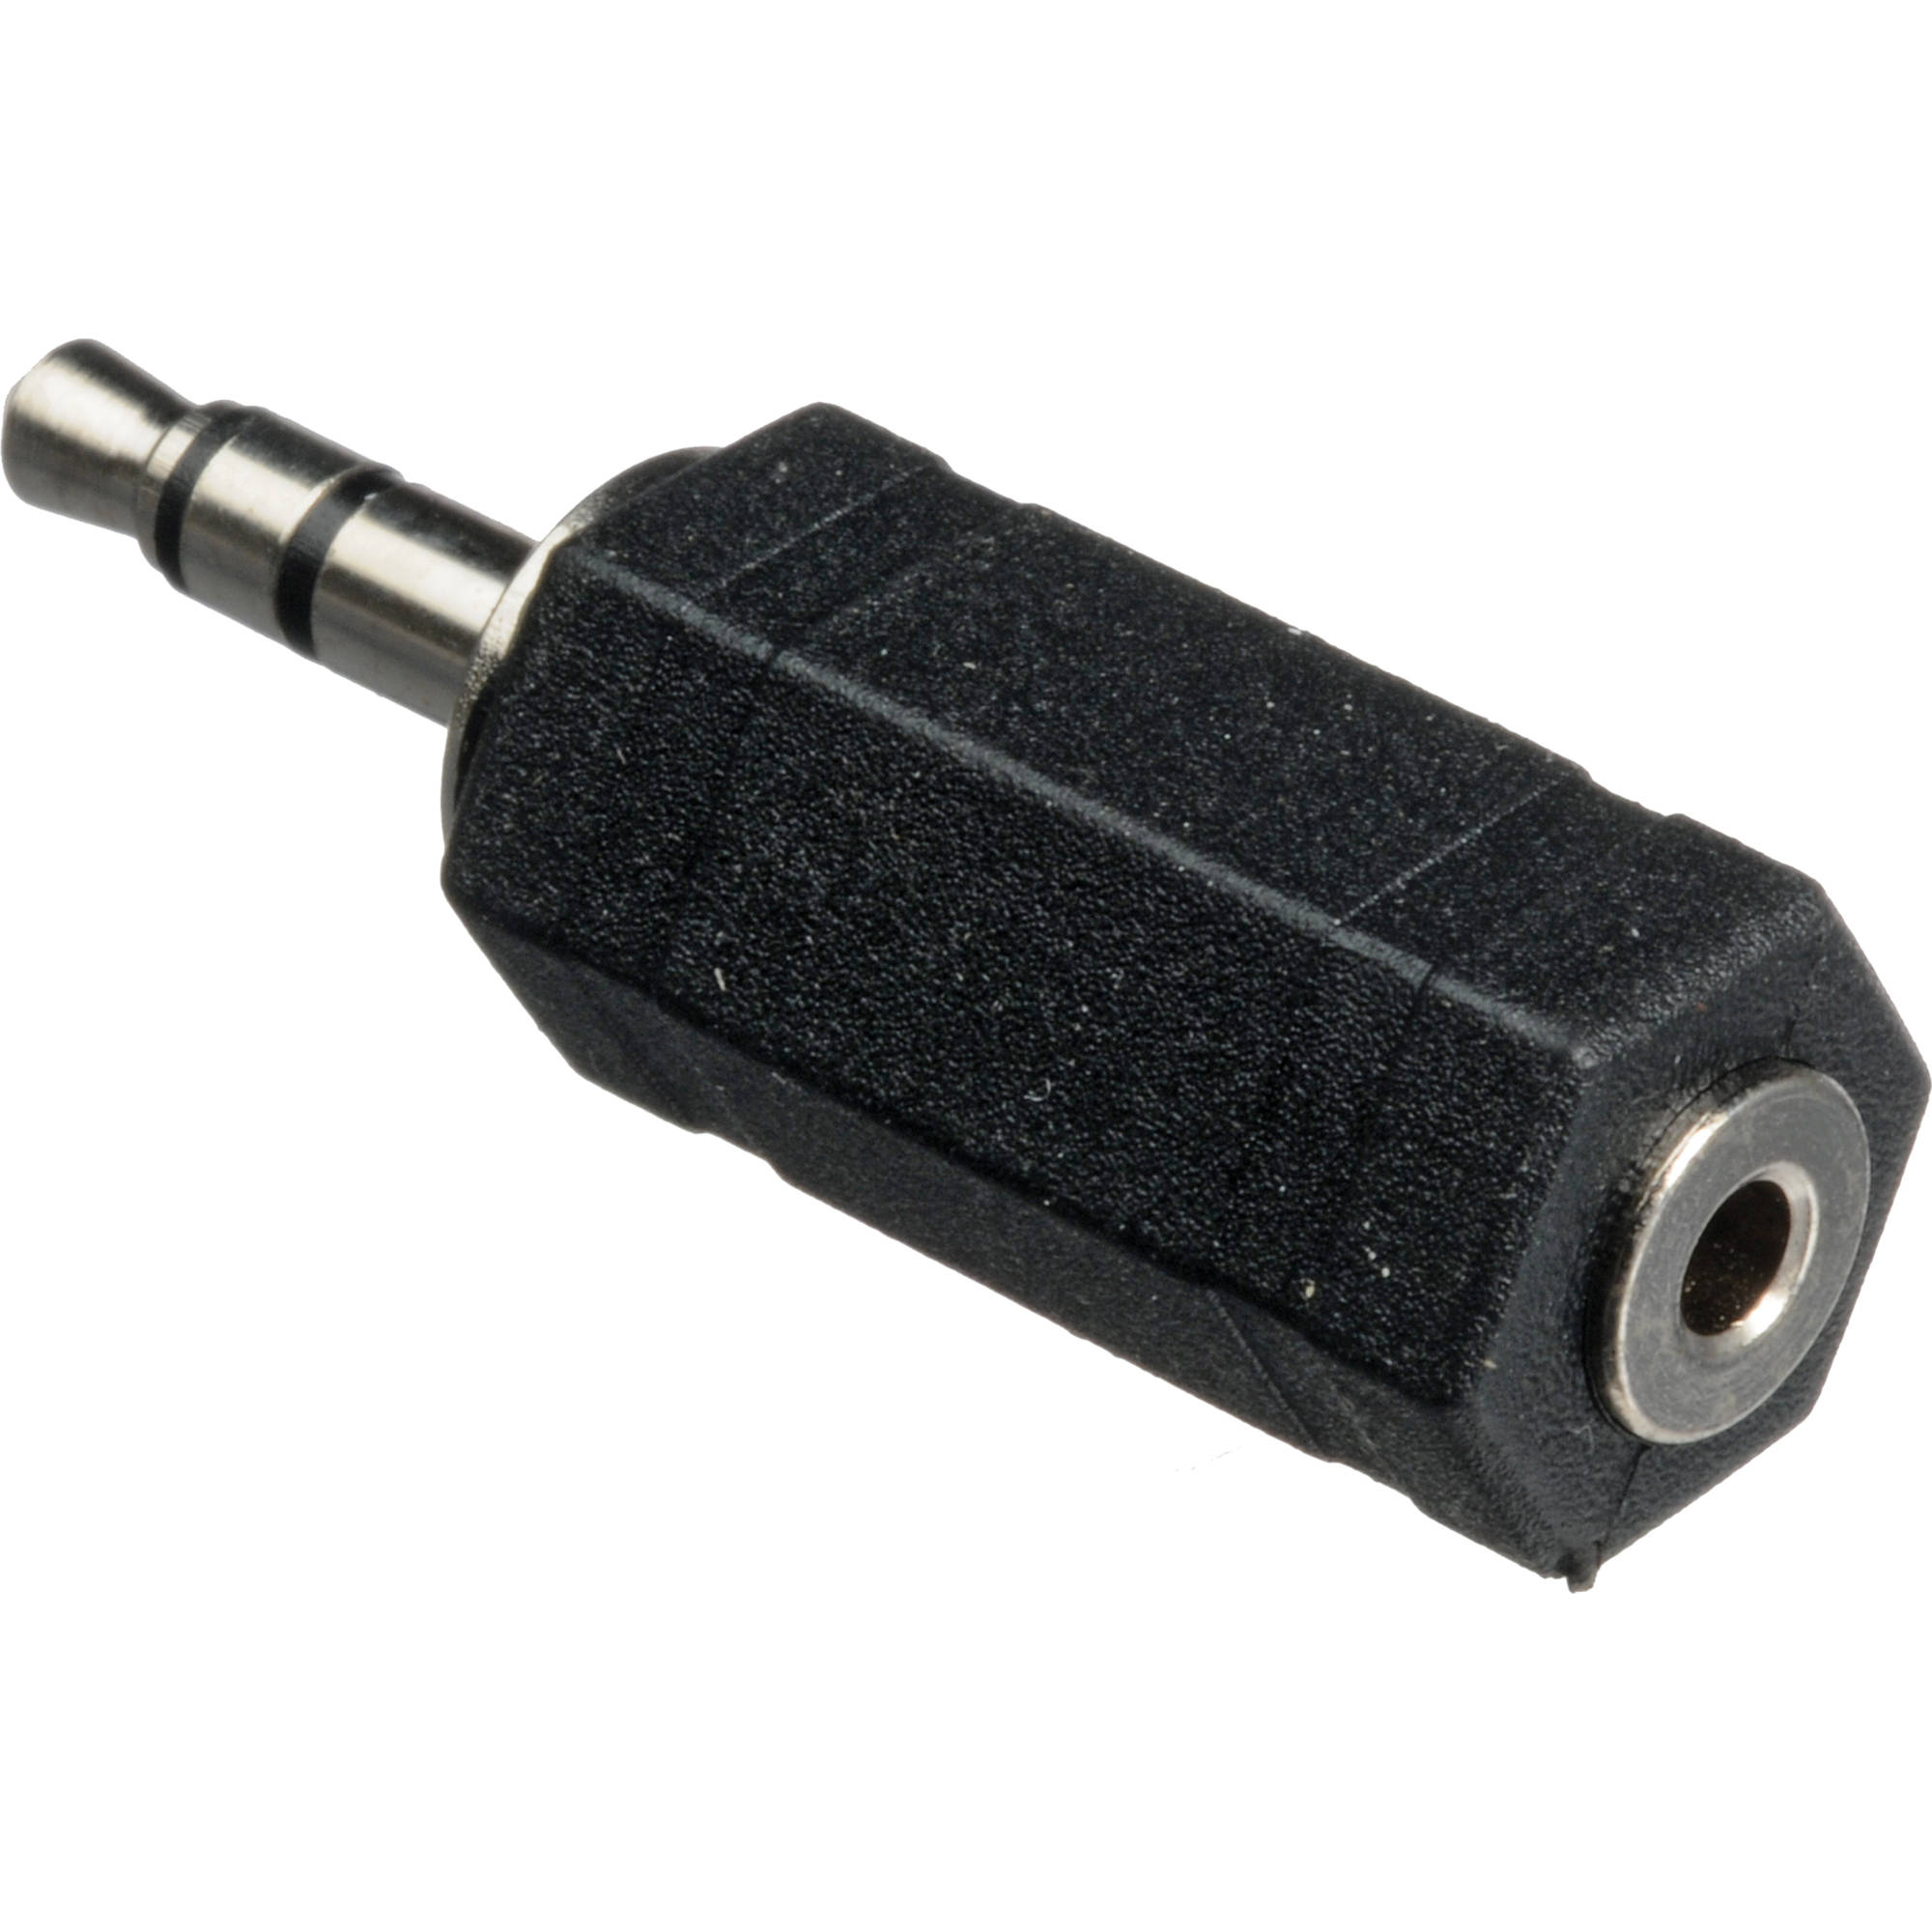 A-3525MF2: 3.5mm Stereo male to 2.5mm Stereo female adapter